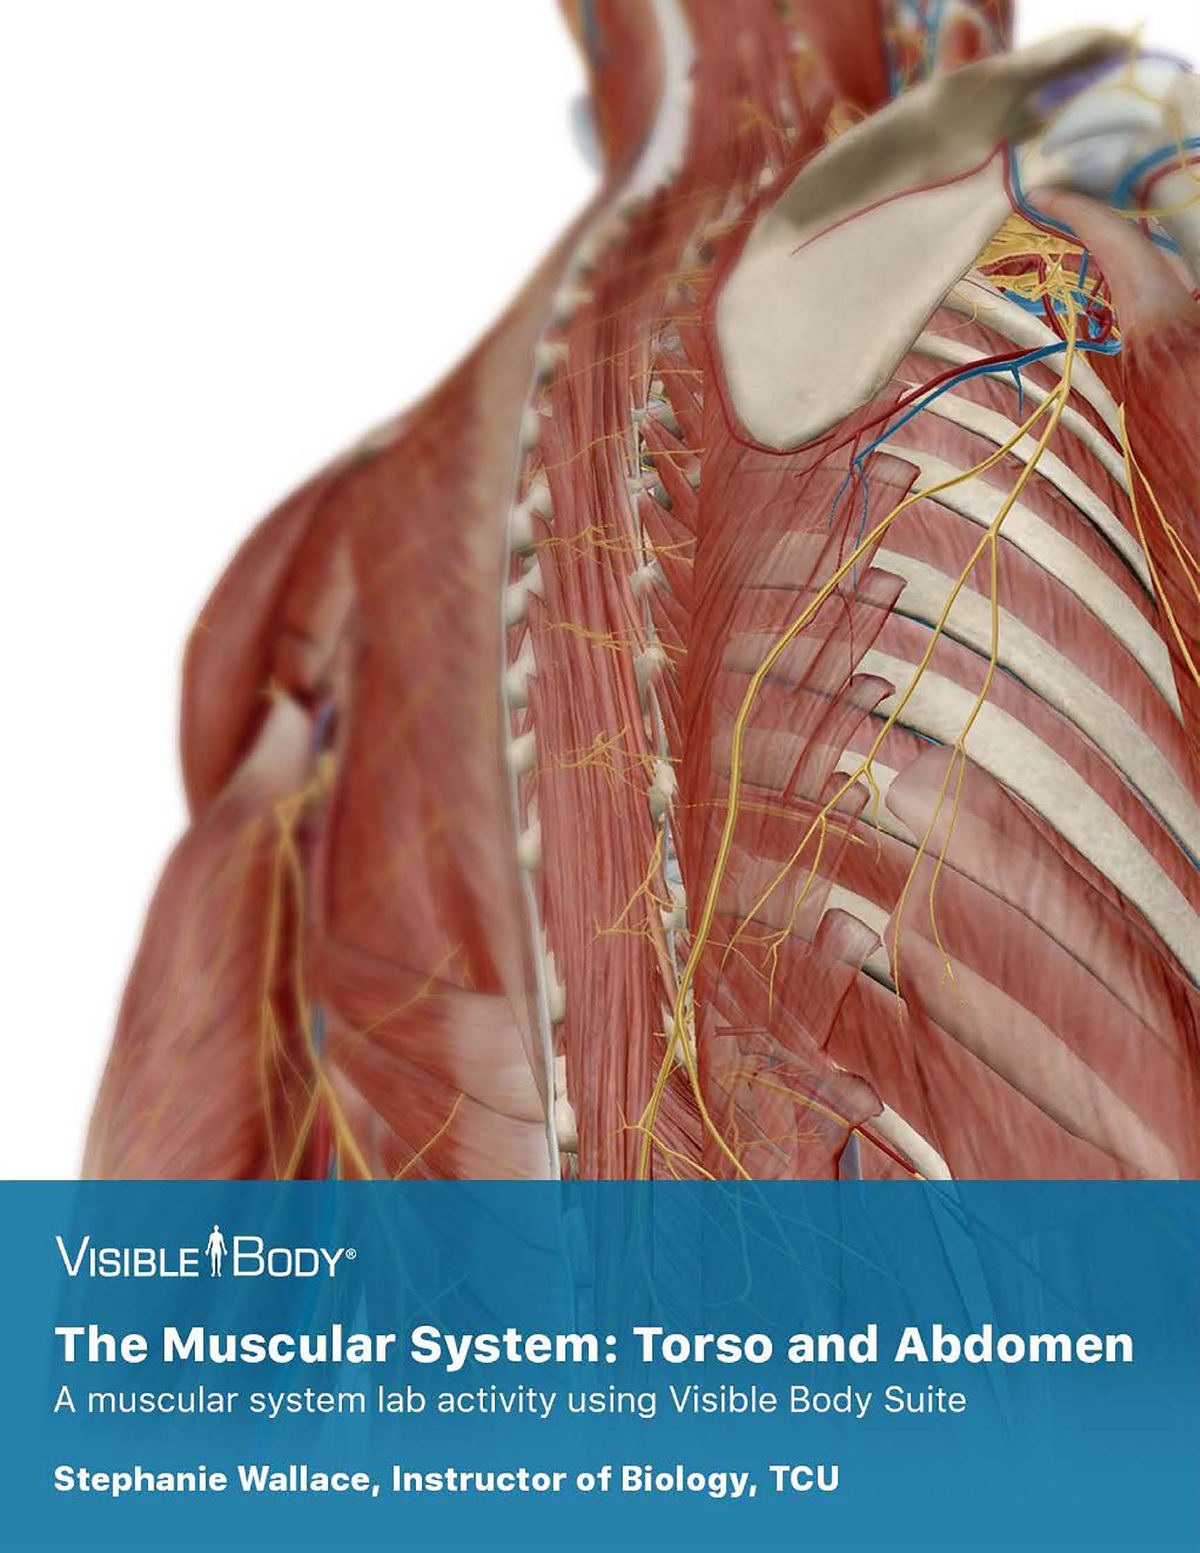 lab manual muscles abdomen thorax pdf - PRE-LAB EXERCISES Before